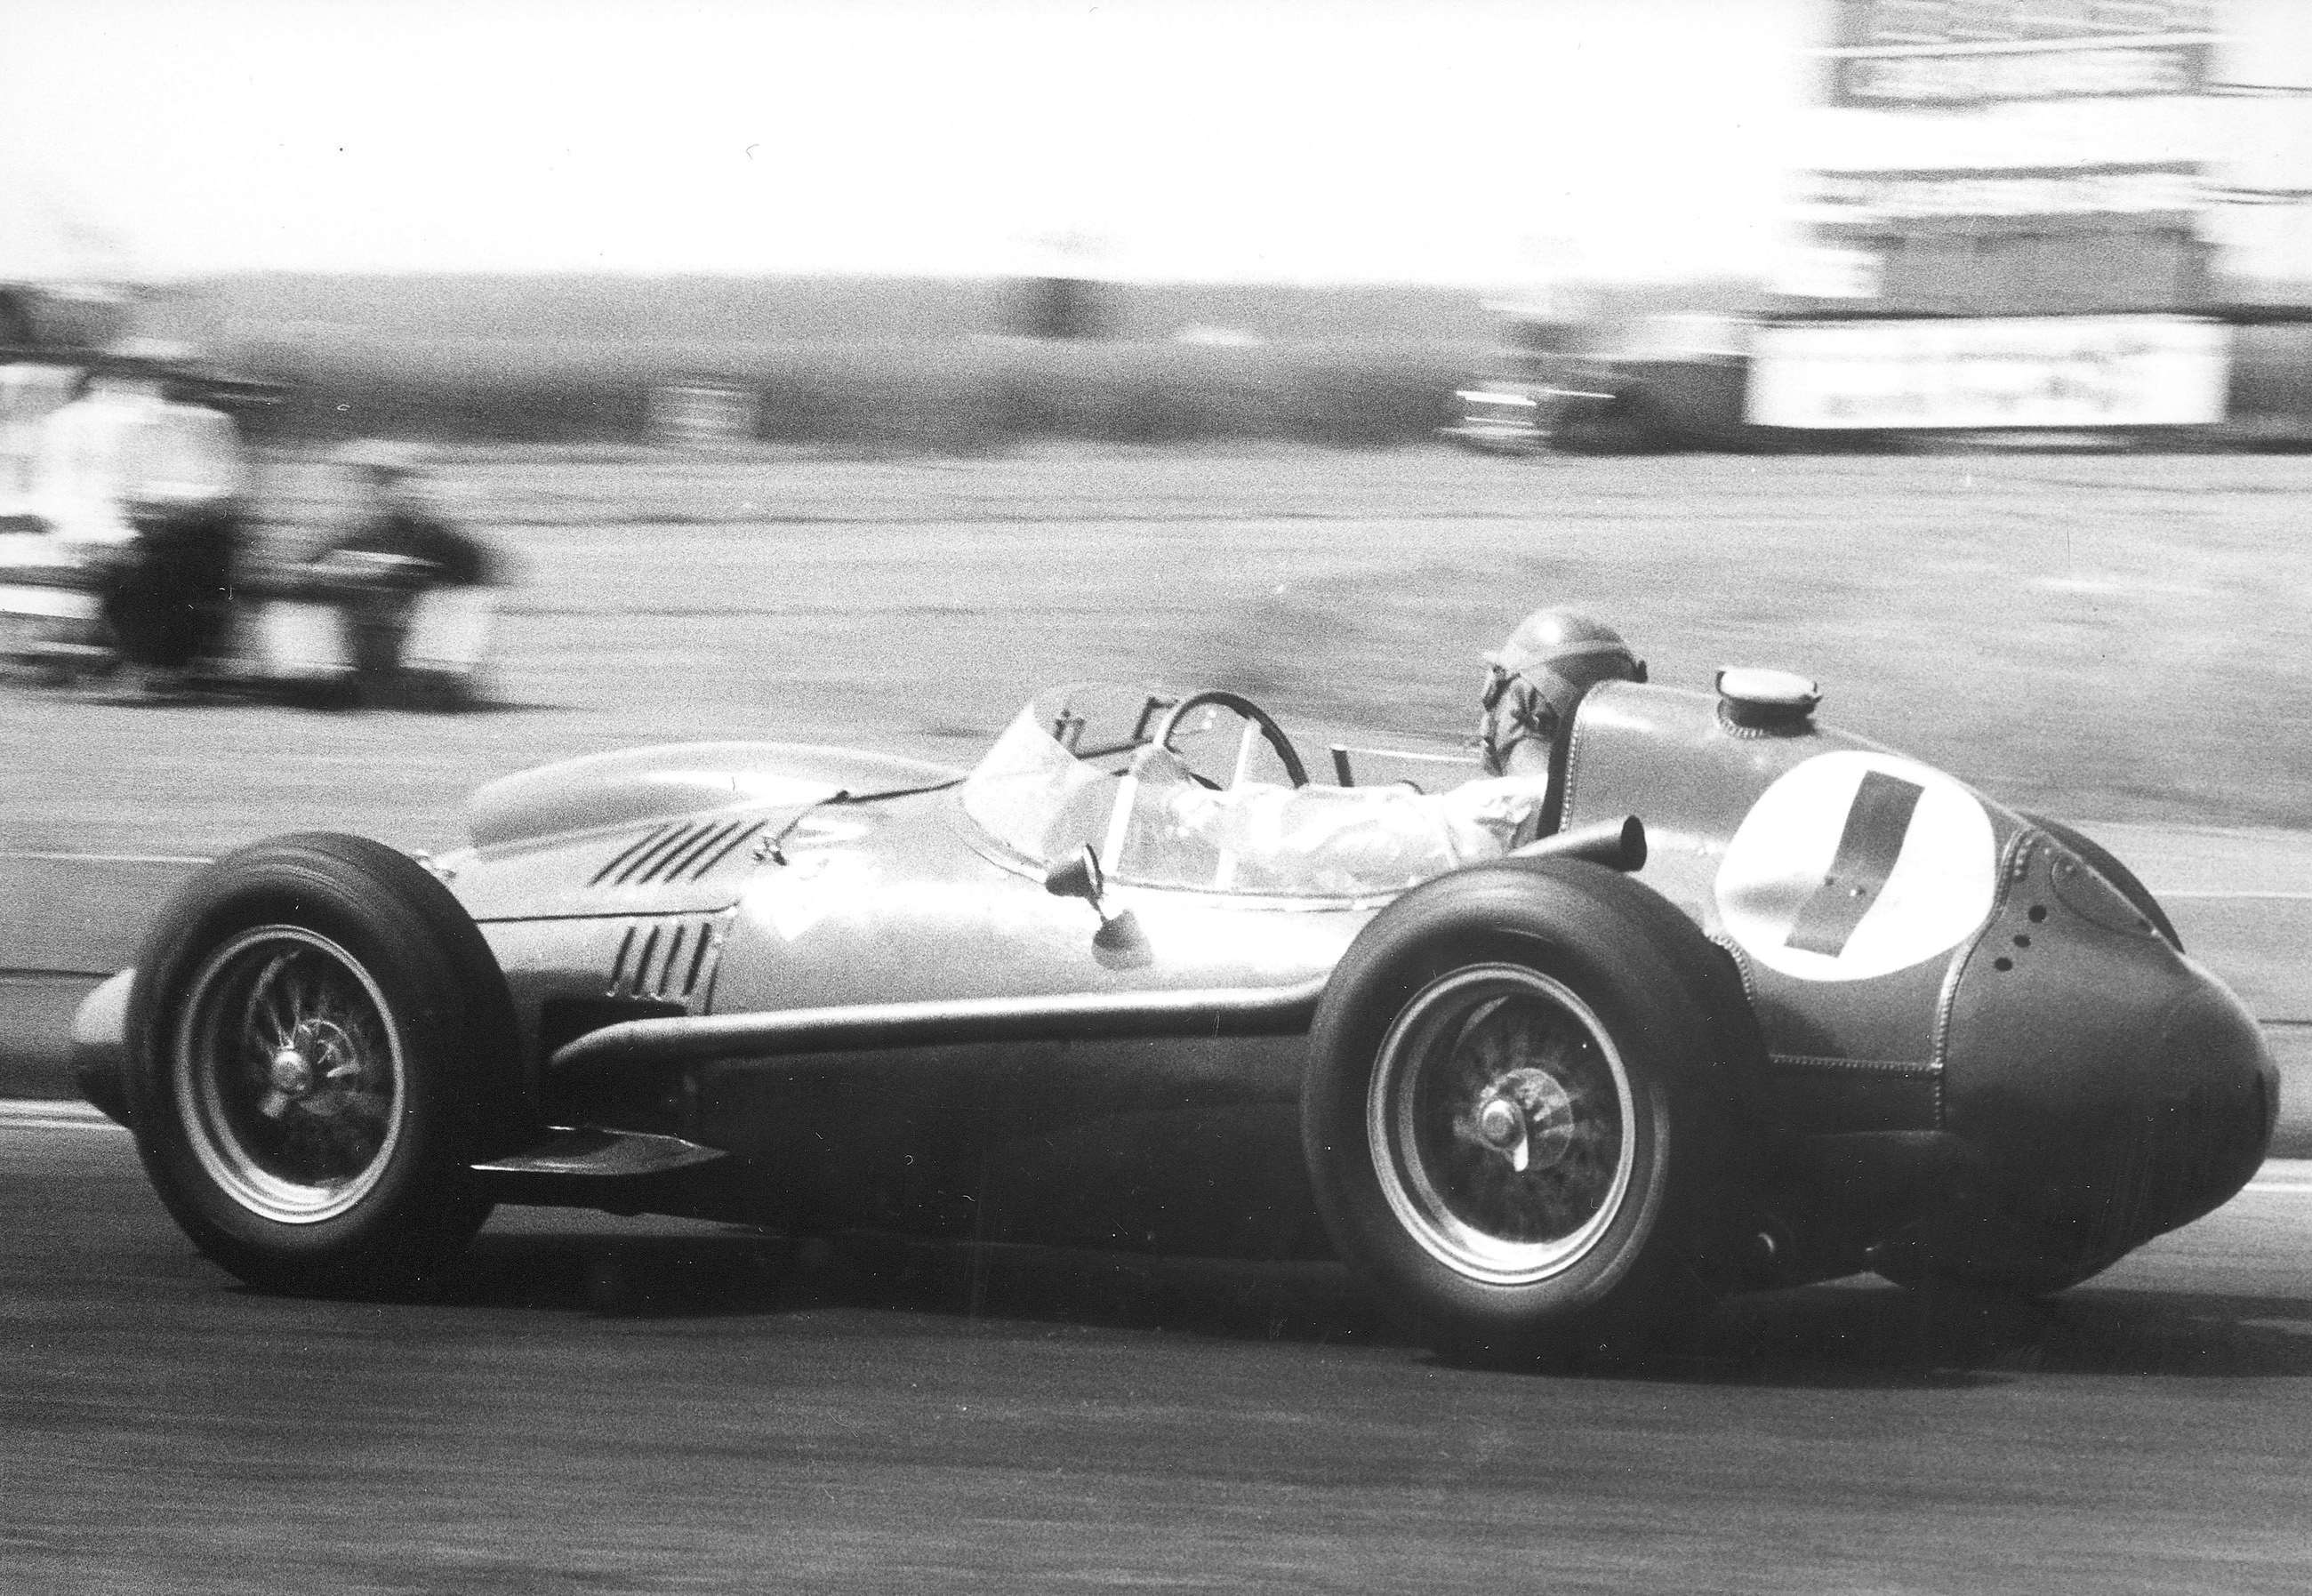 Peter Collins – winner of the British GP, 1958… Two weeks later he would die after crashing in the German GP at the Nurburgring.